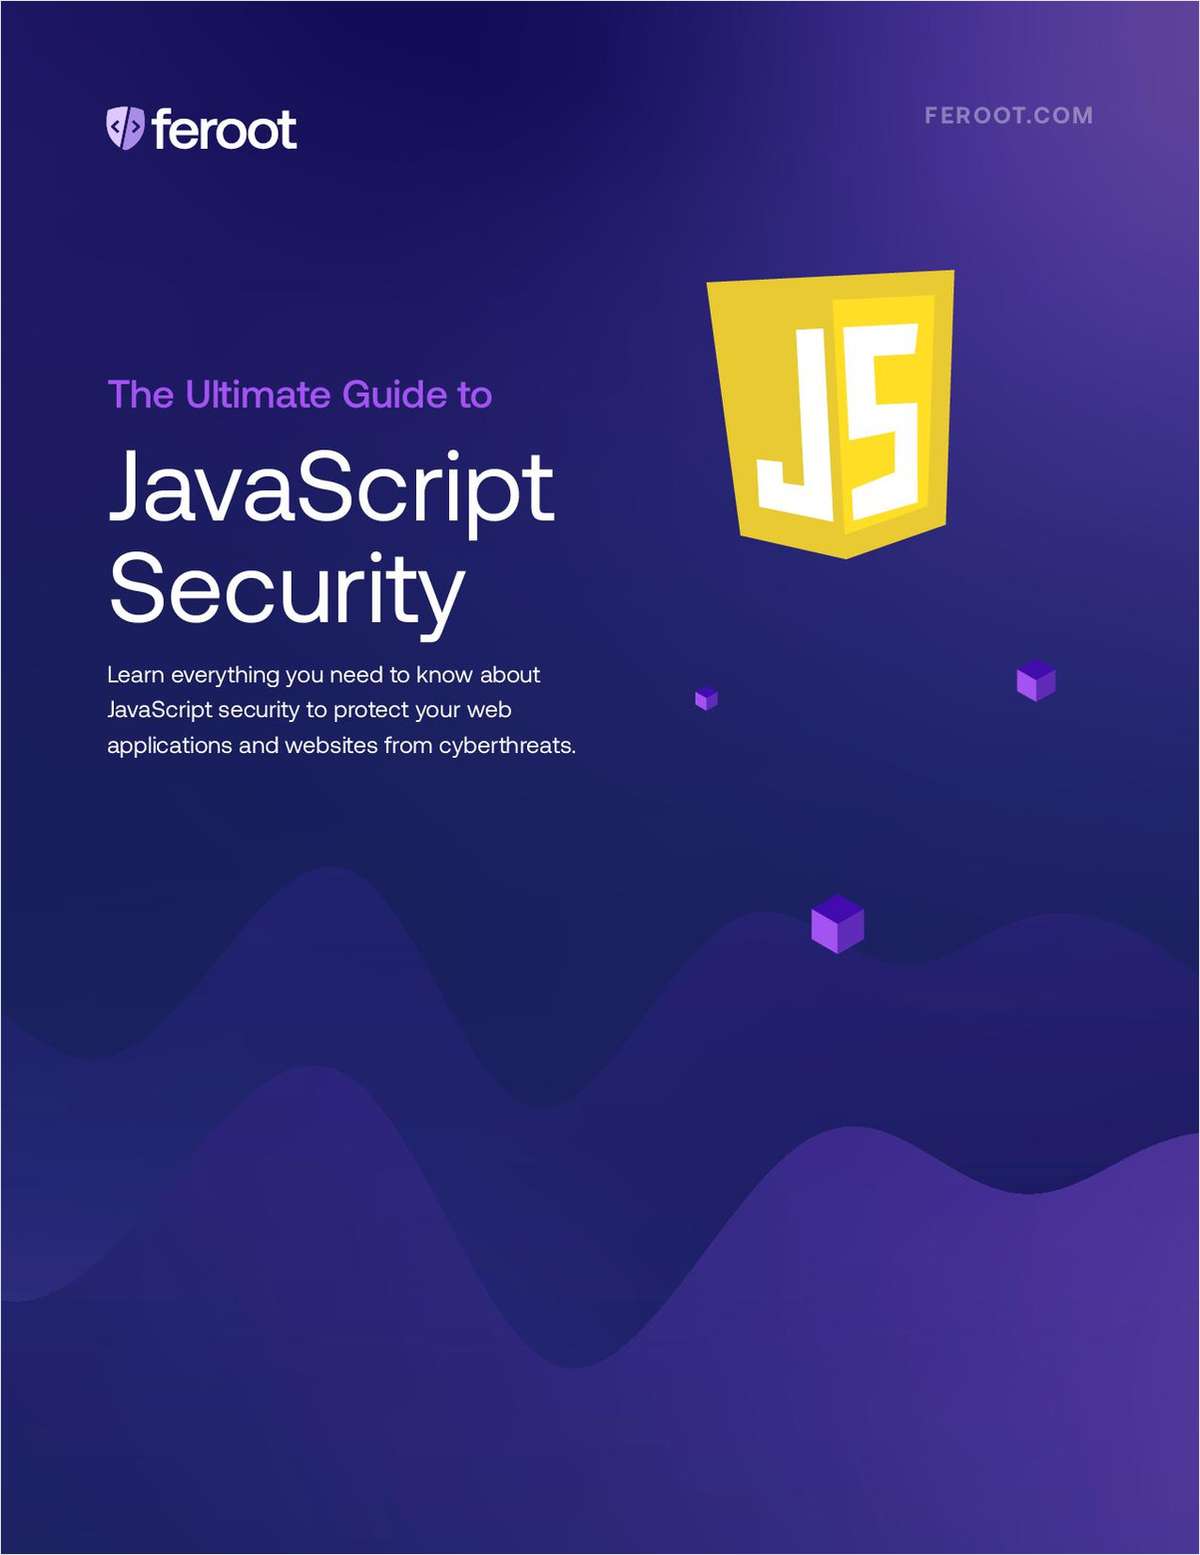 The Ultimate Guide to JavaScript Security